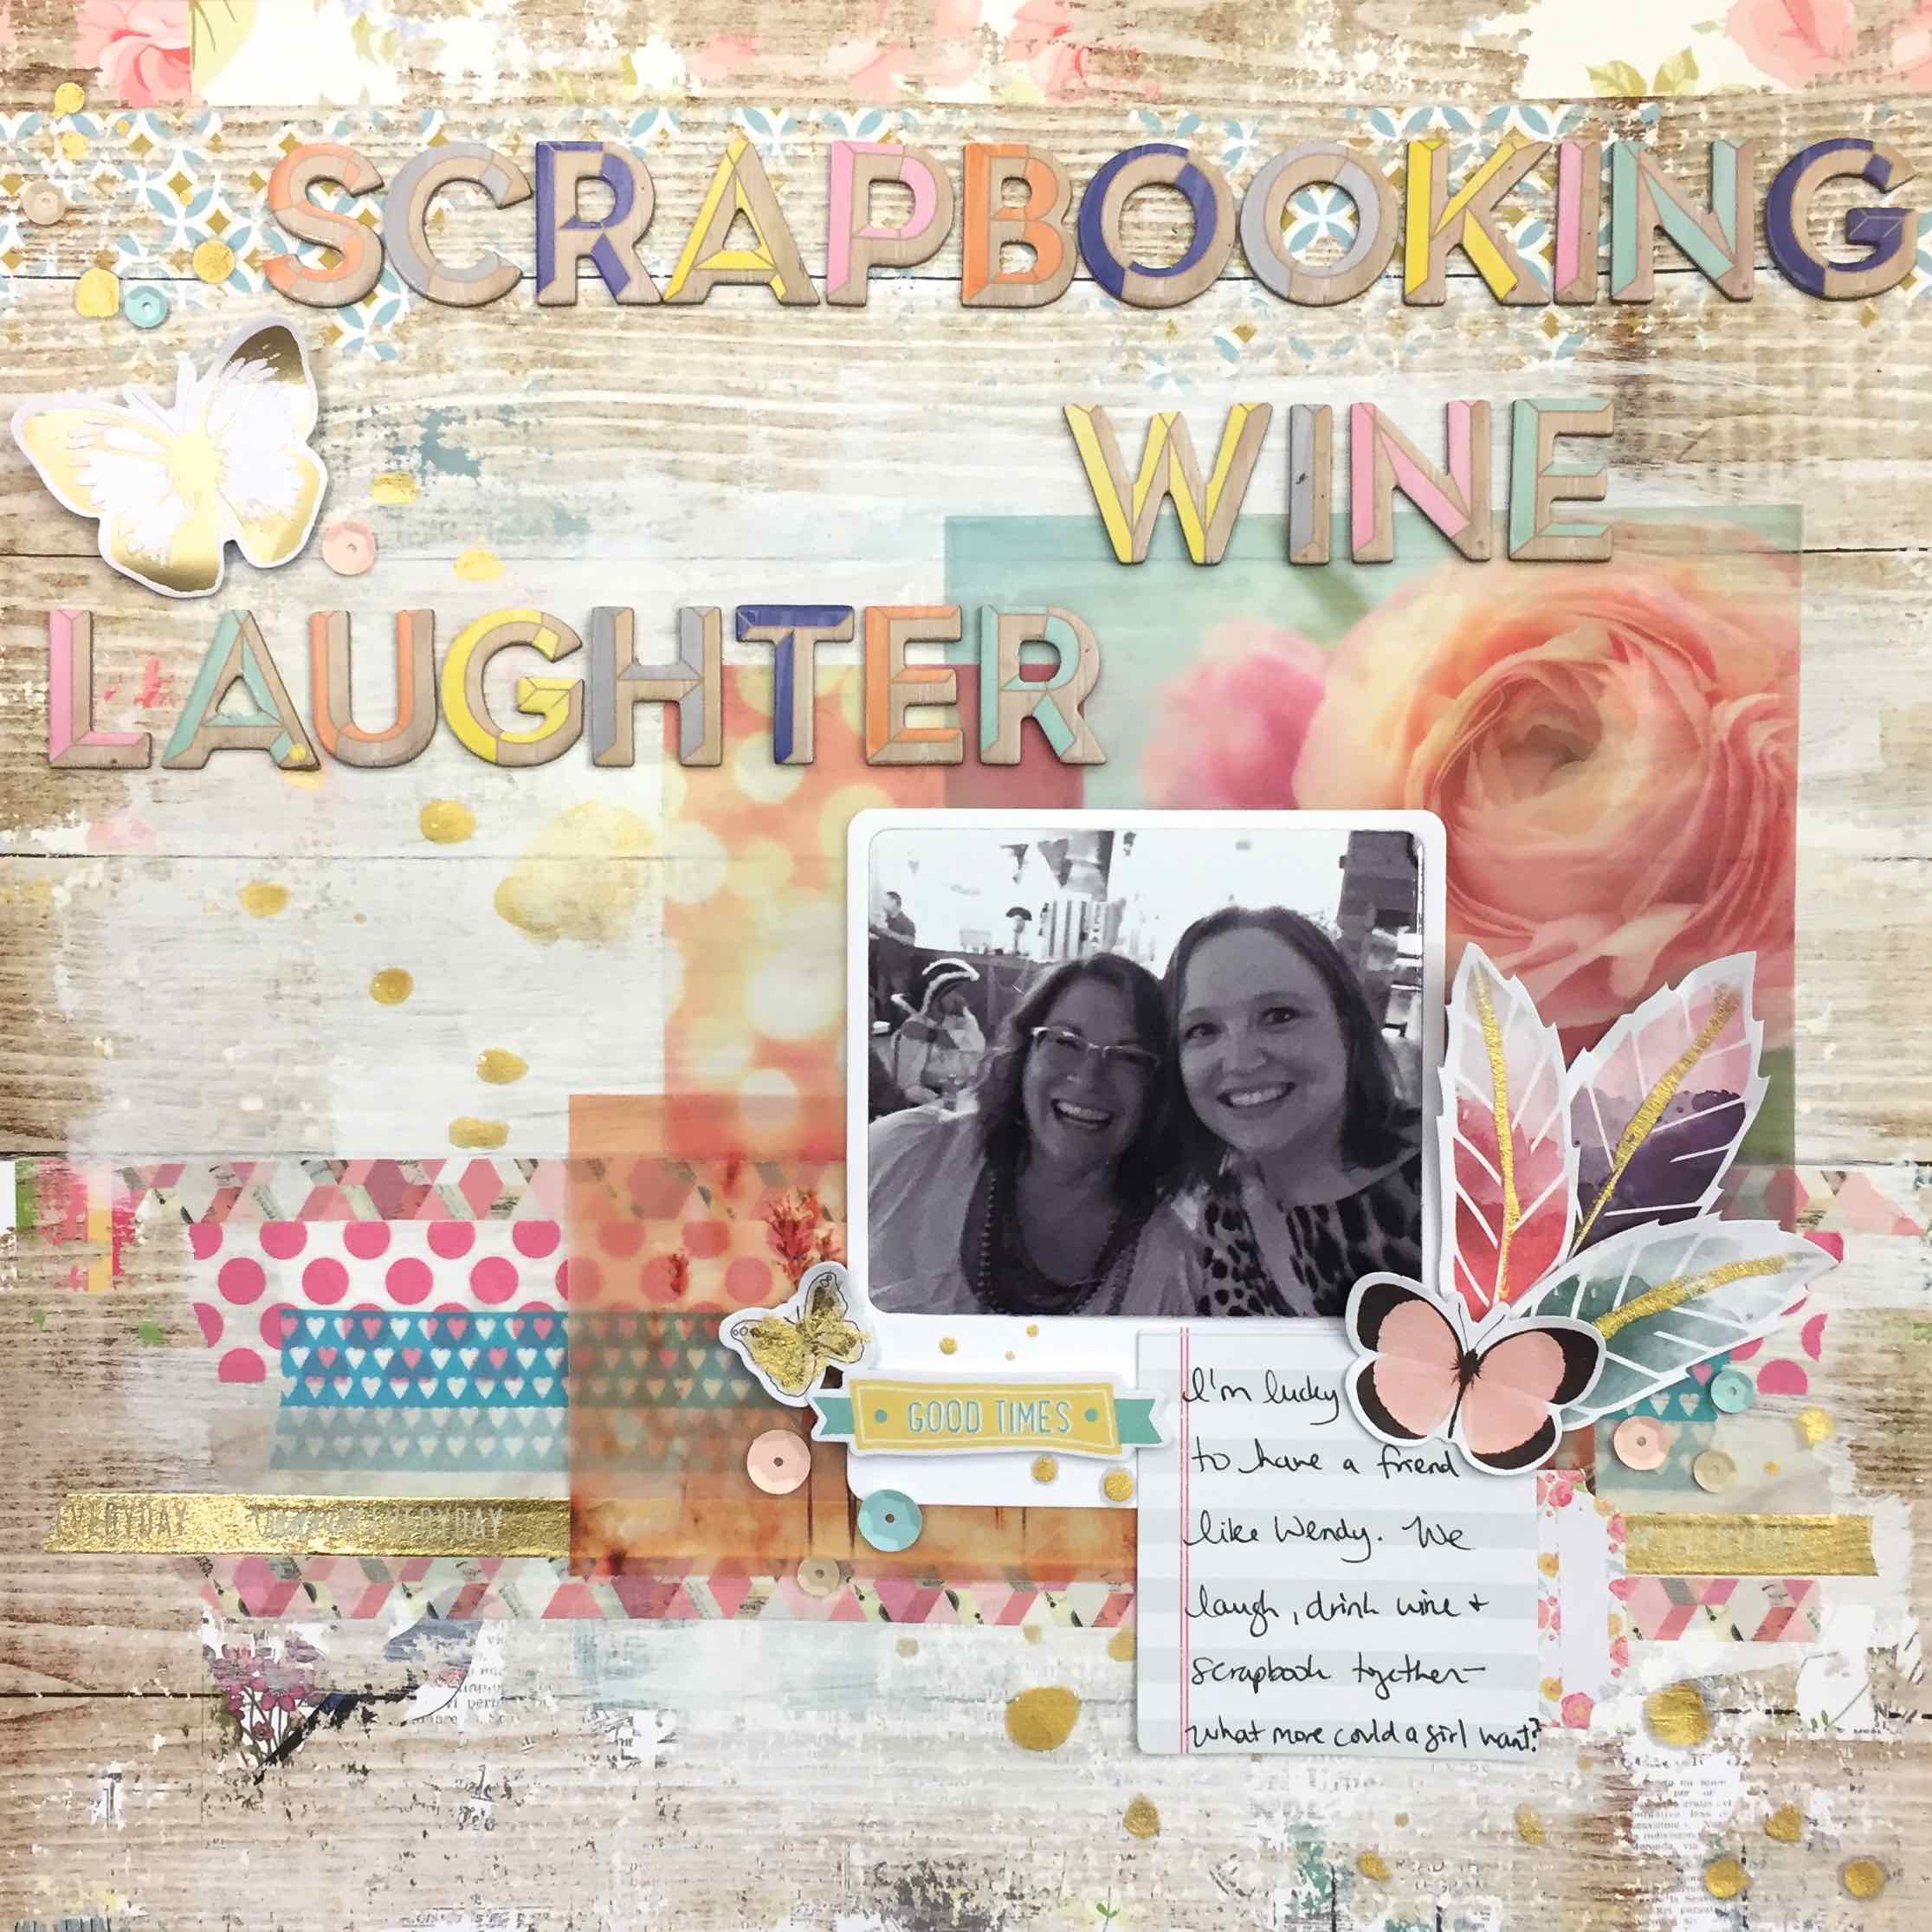 scrapbooking wine laughter layout Alice Boll